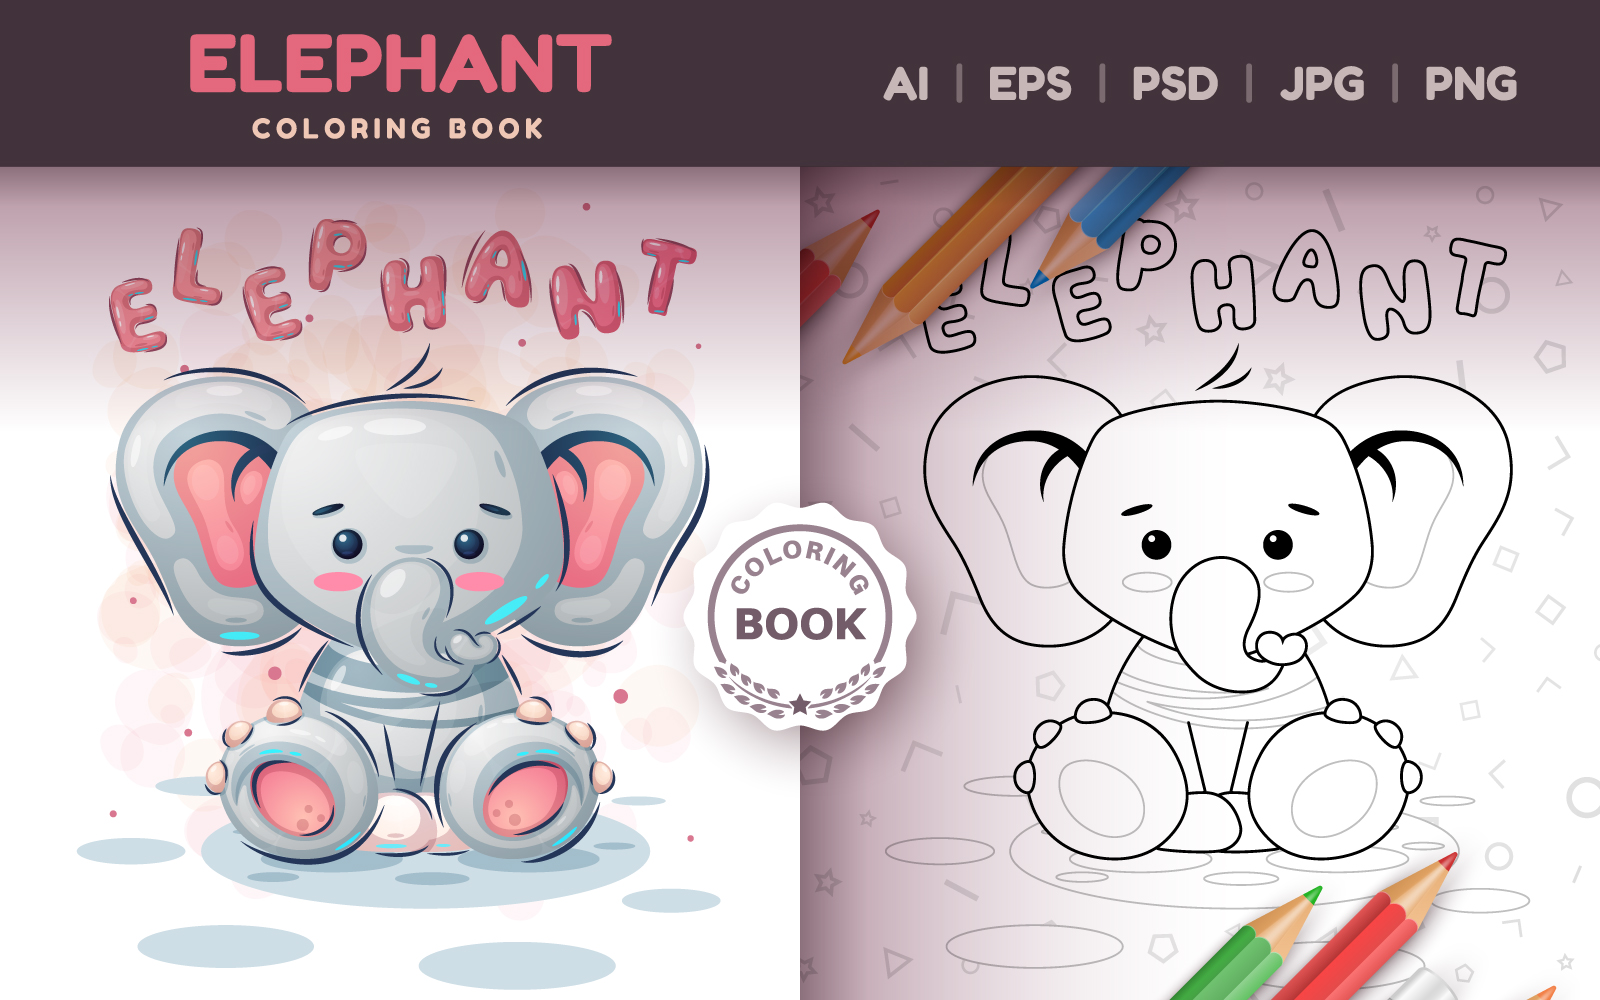 Teddy Elephant - Game For Kids, Coloring Book, Graphics Illustration